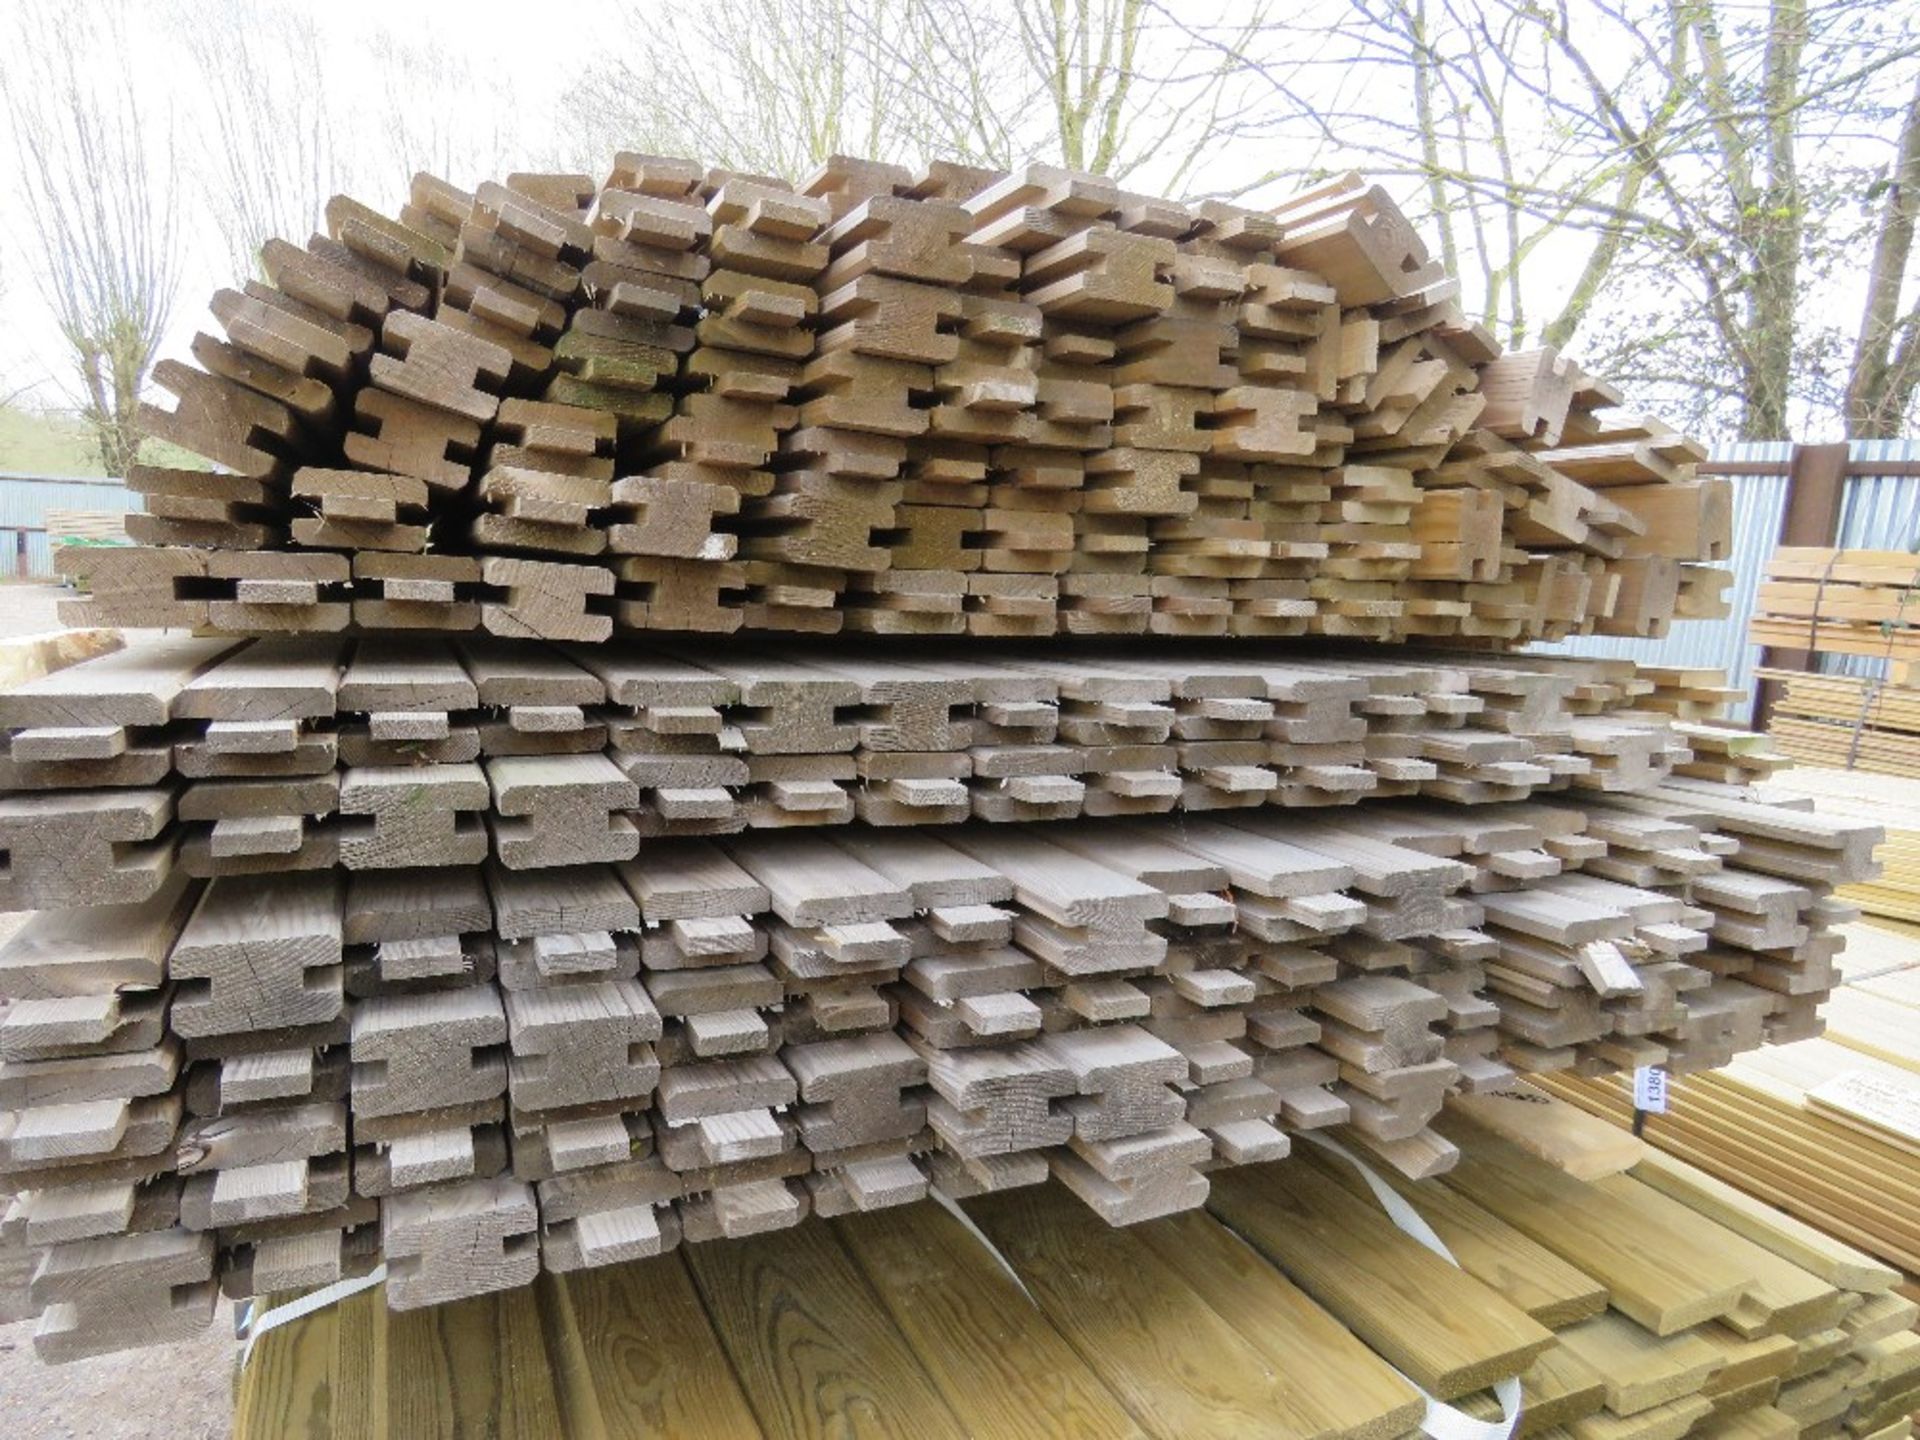 PACK OF TREATED TIMBER FENCE PANEL FRAME SLOTTED TIMBERS: 55MM X 35MM @ 1.4M-1.7M LENGTH APPROX. - Image 2 of 3